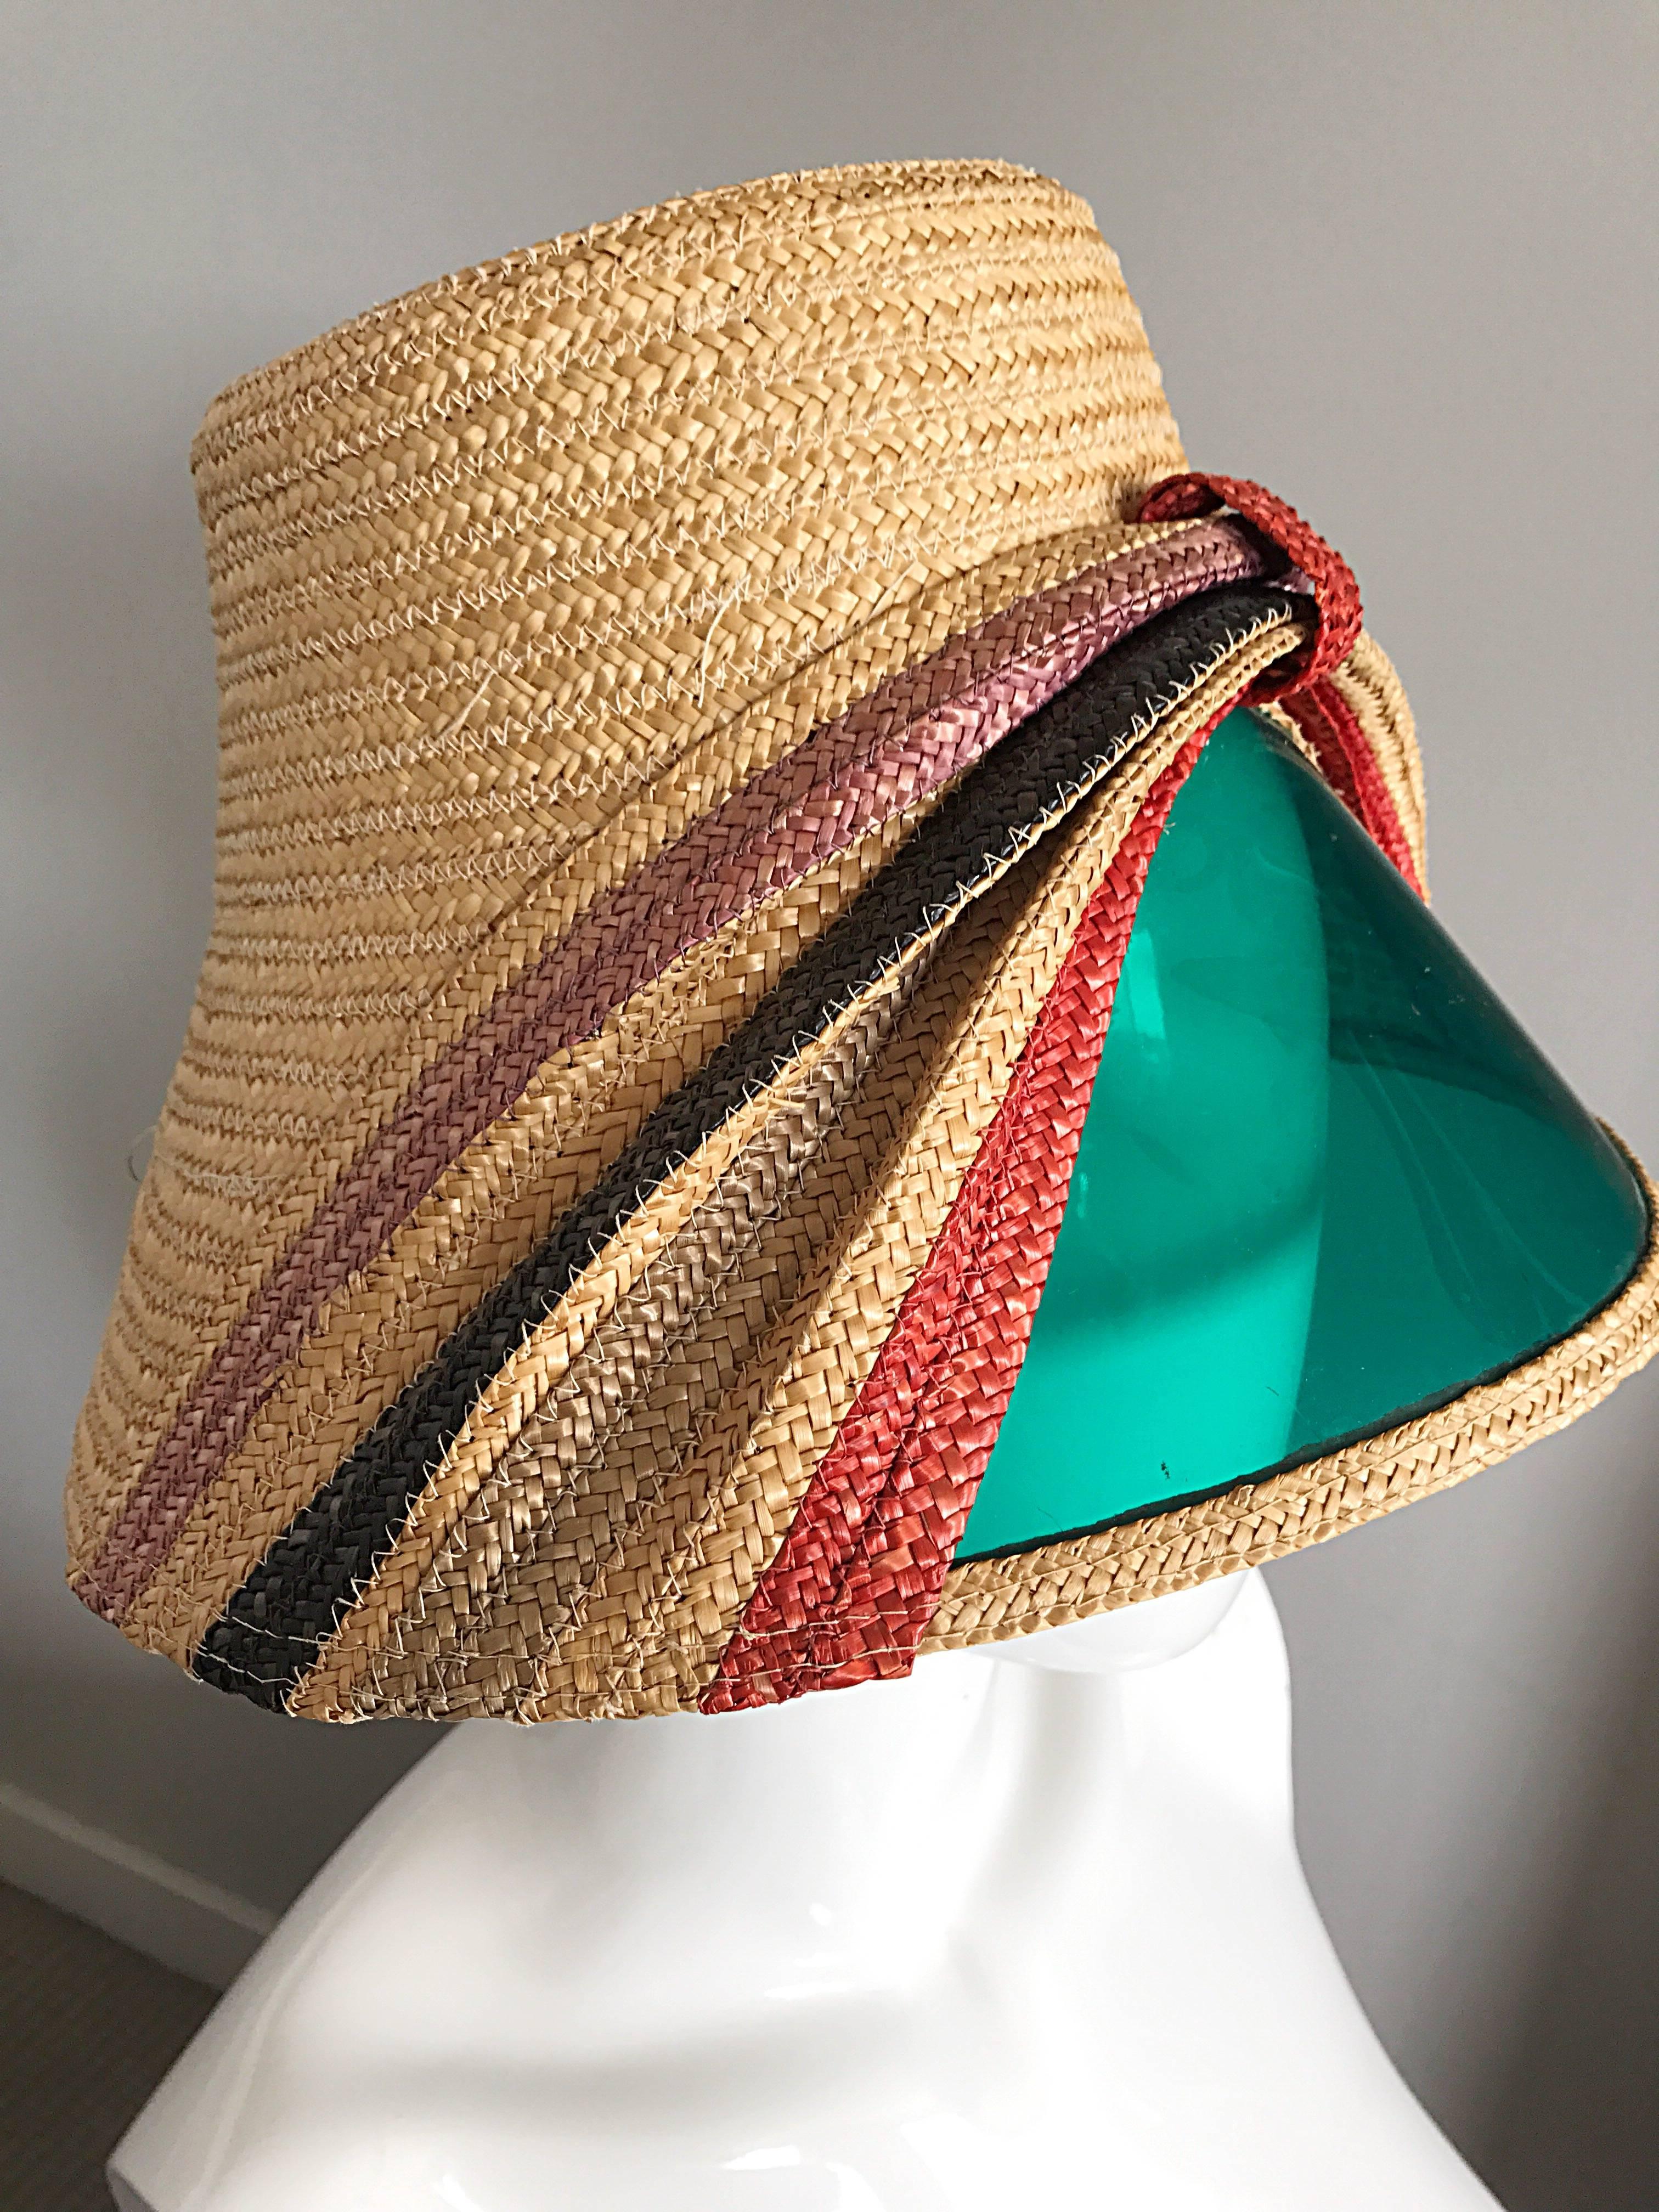 straw hat with sunglasses built in